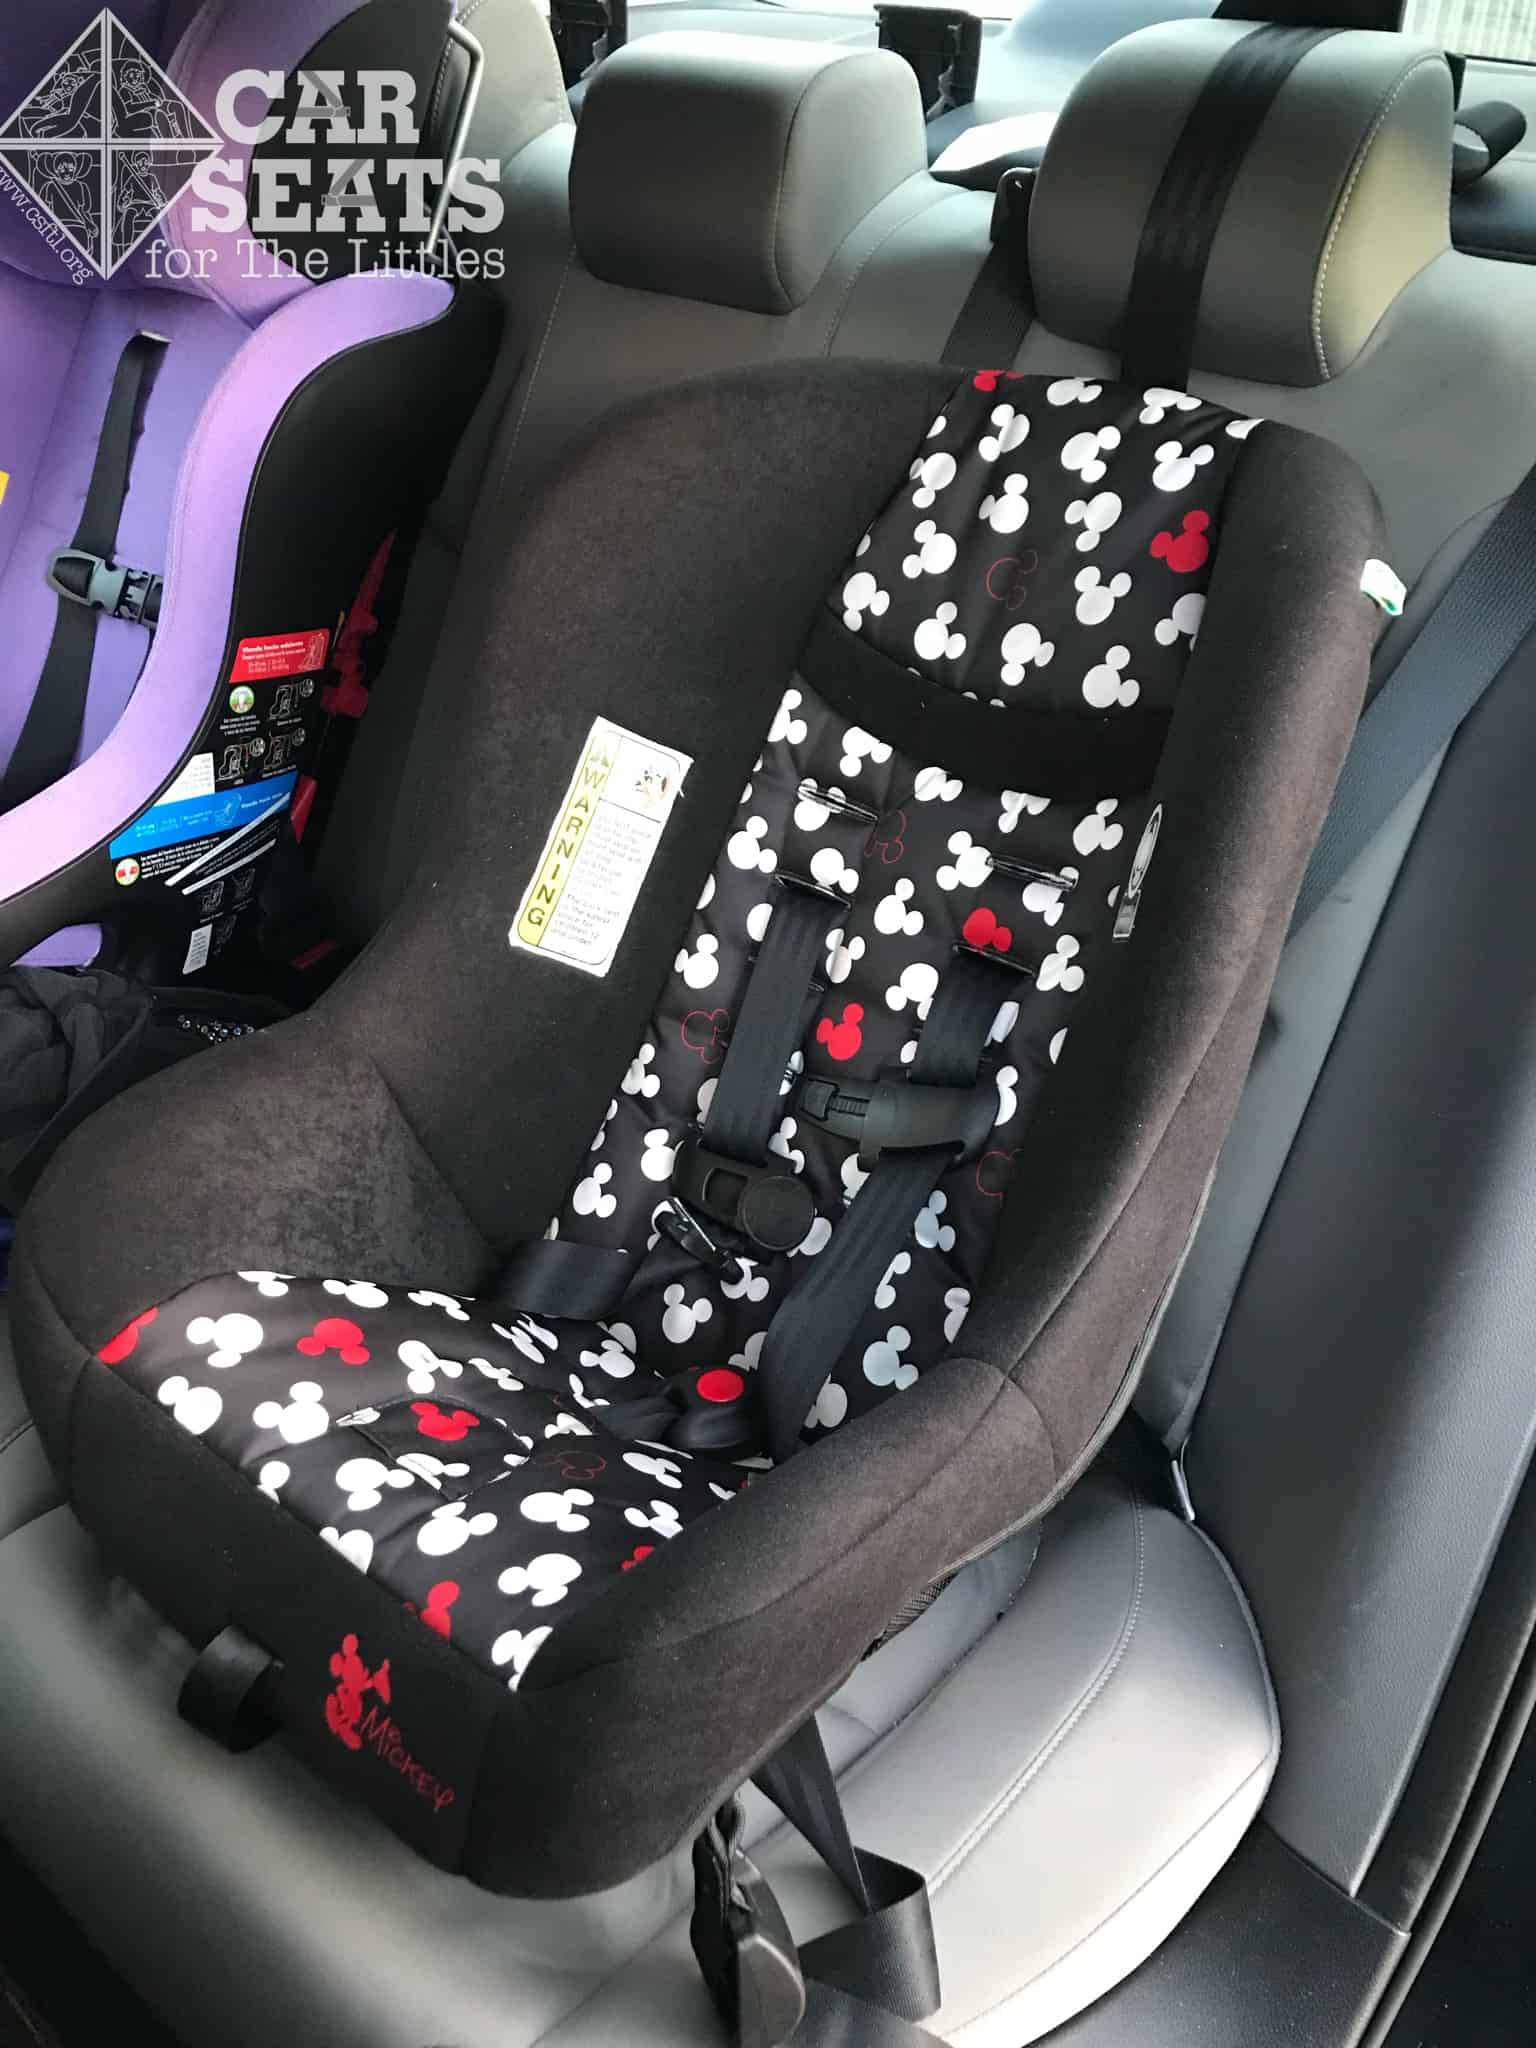 cosco car seat and stroller